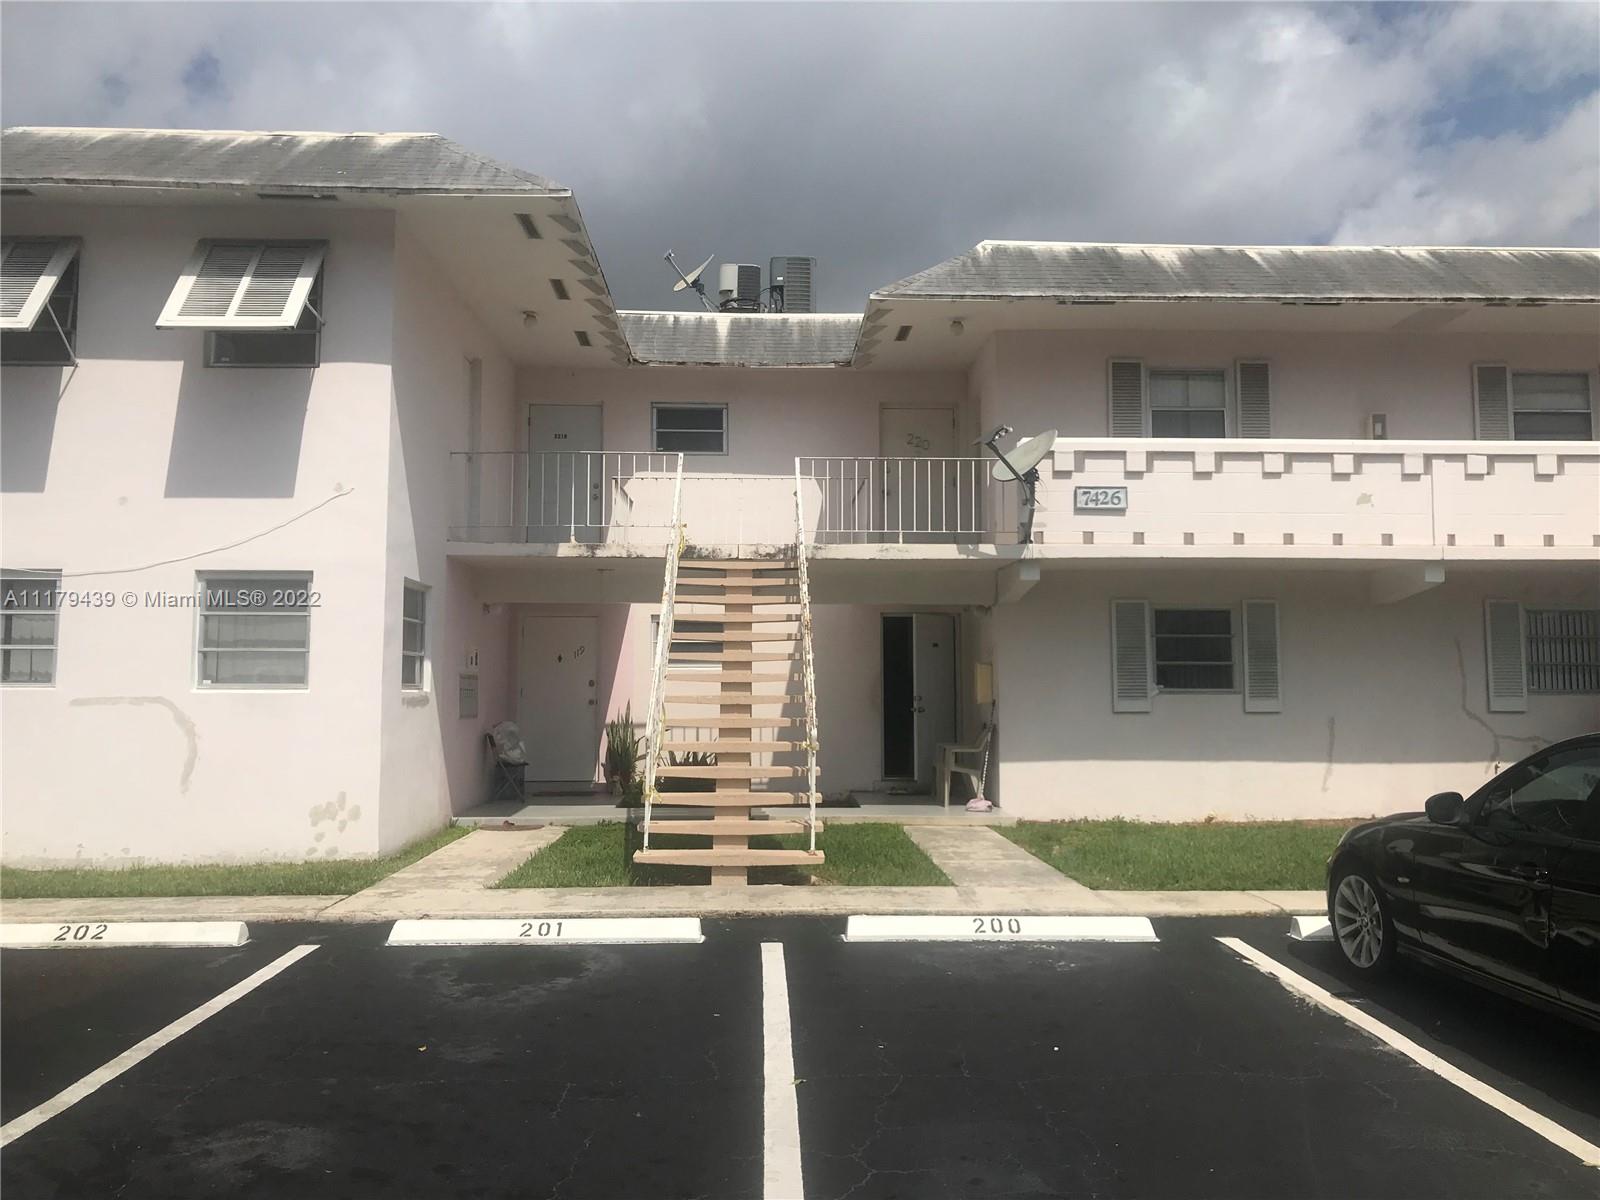 Great location, near all in walking distance to Dadeland mall.
Tenant occupied please do not disturb tenant. TEXT only please it will be answered
by appointment only at tenant convenience 
closing may be delayed ask agent